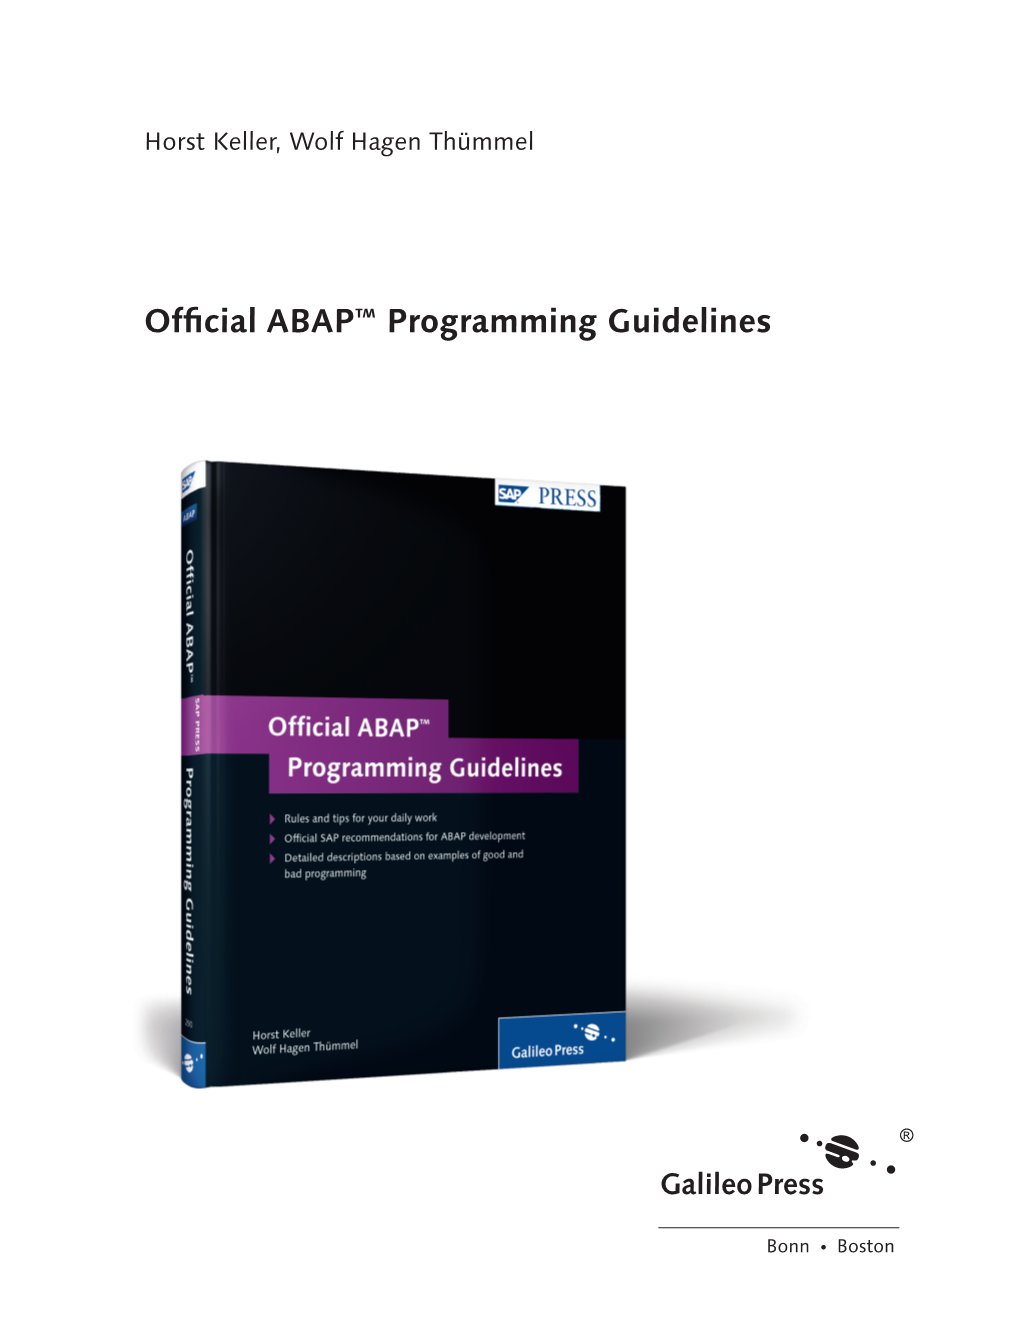 Official ABAP Programminig Guidelines